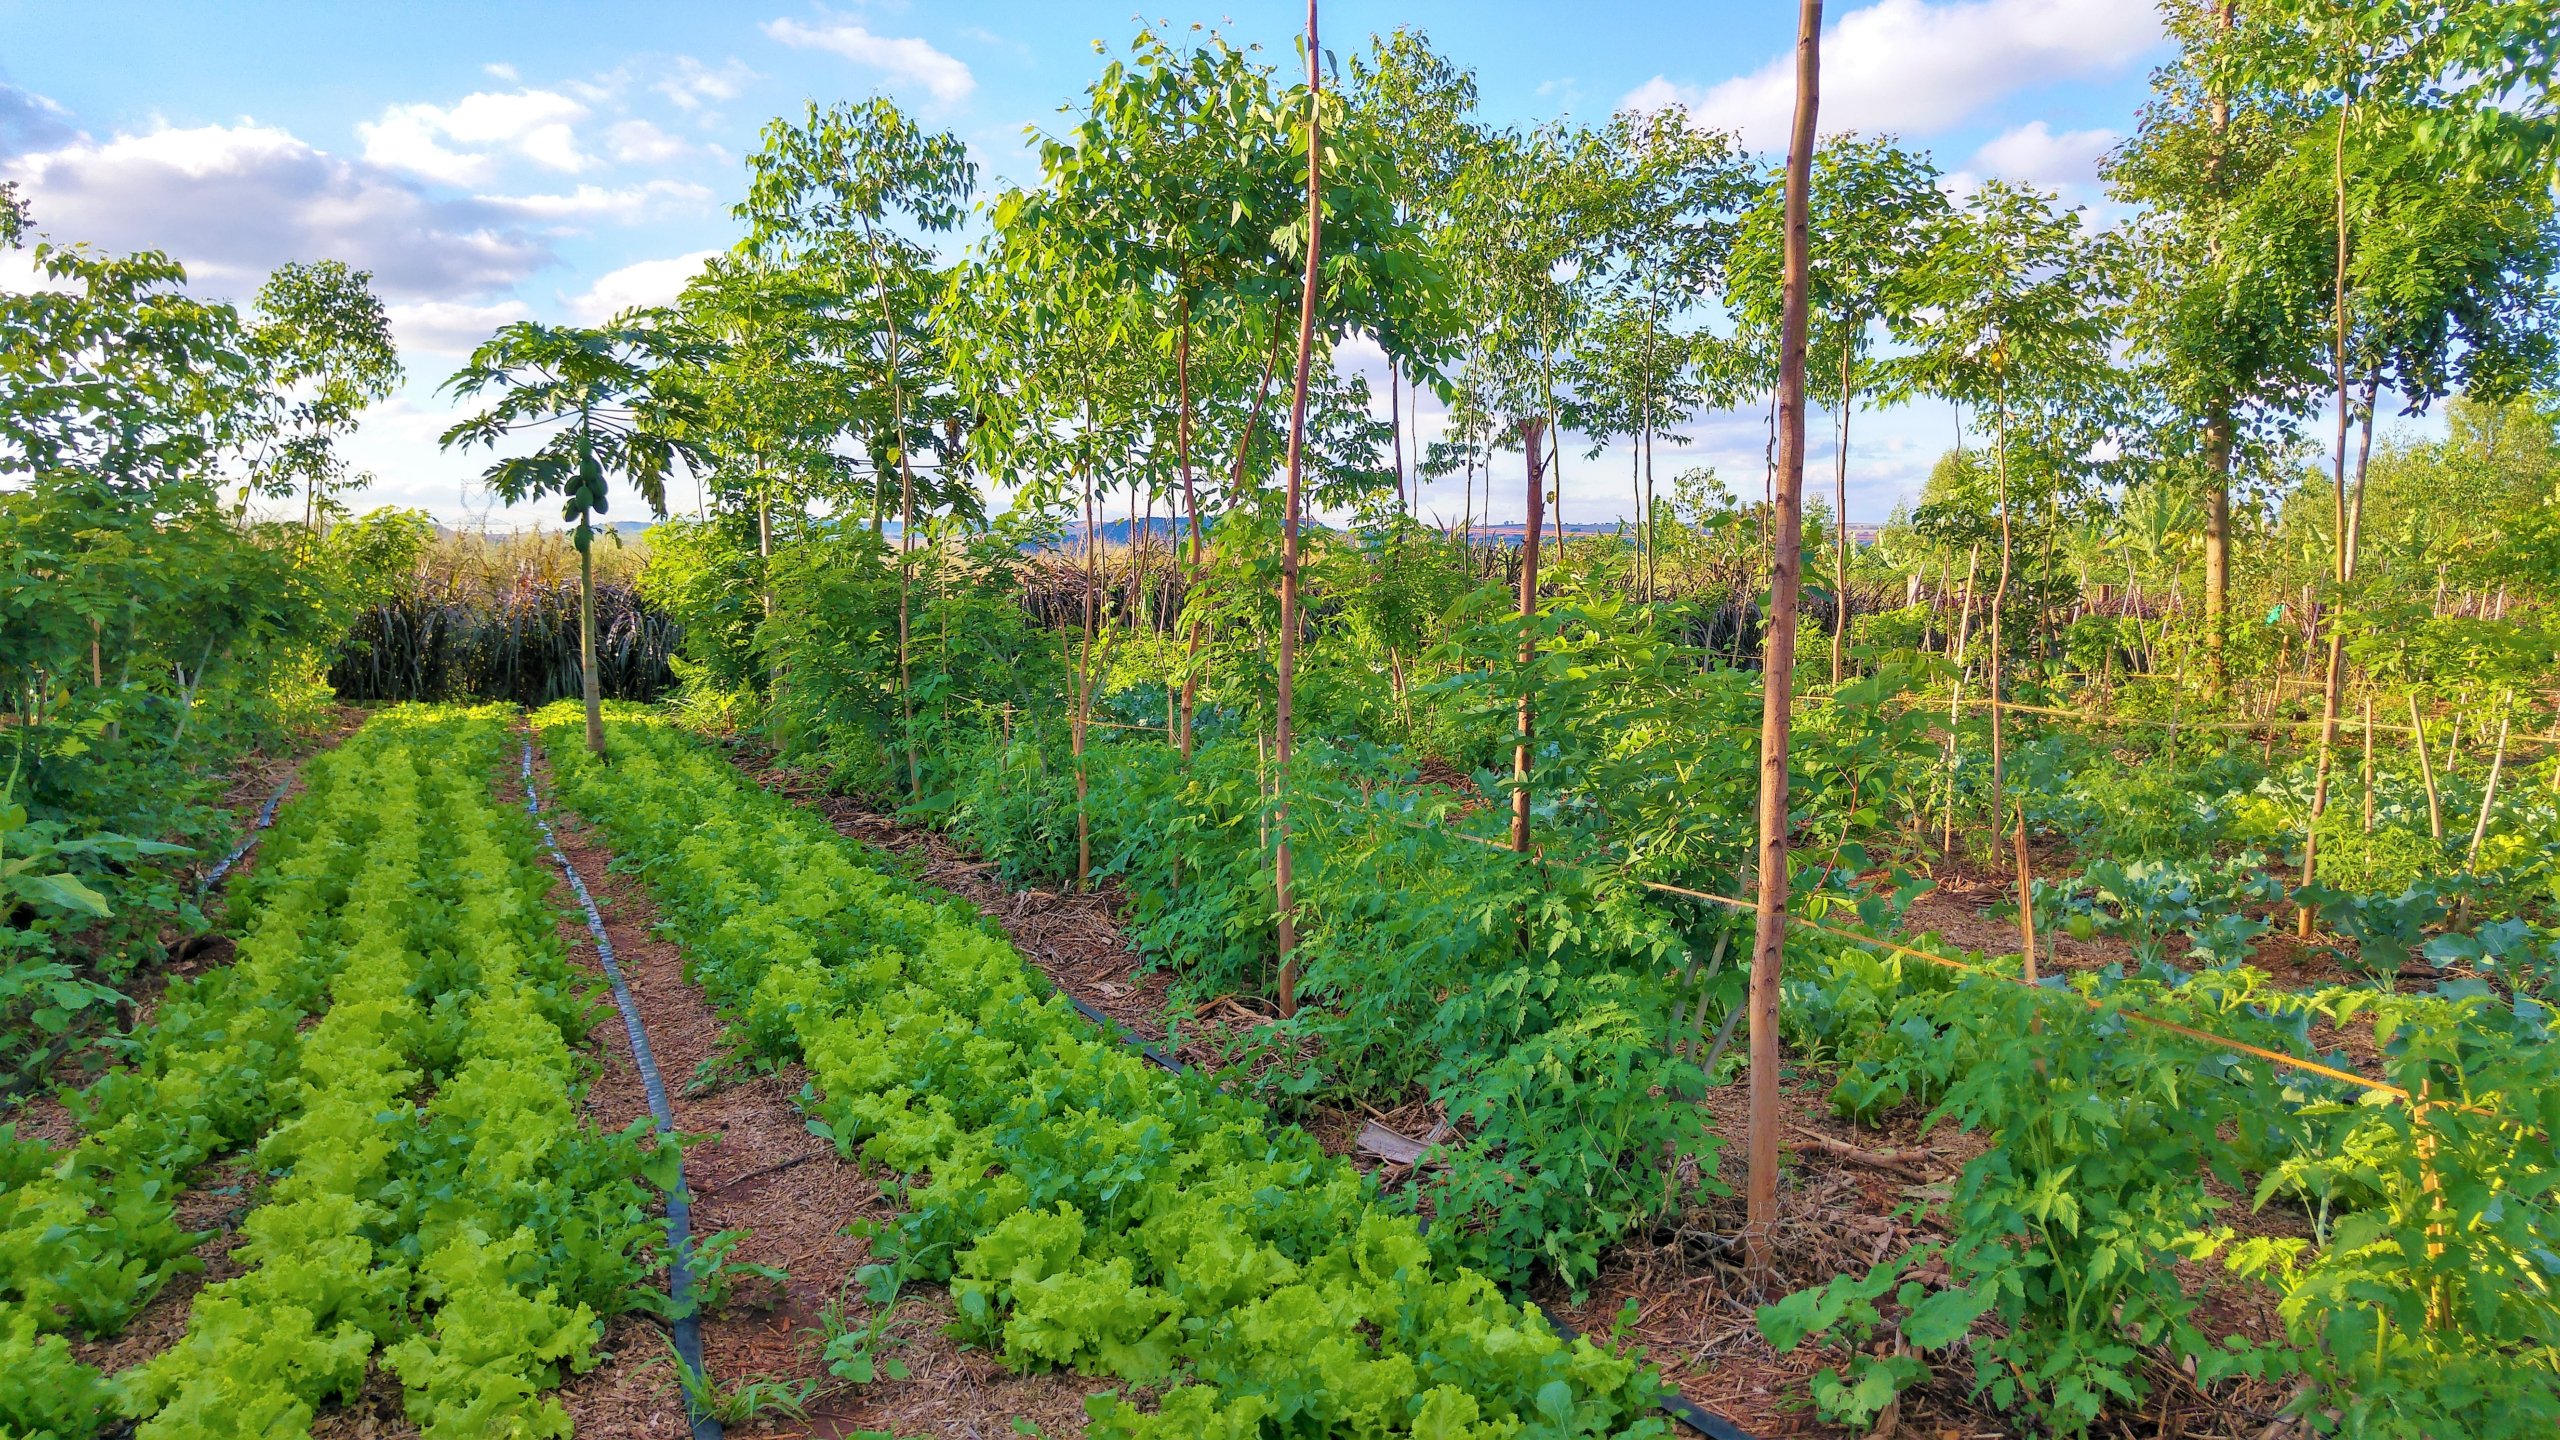 Agroforestry farm of vegetables and trees growing in rows